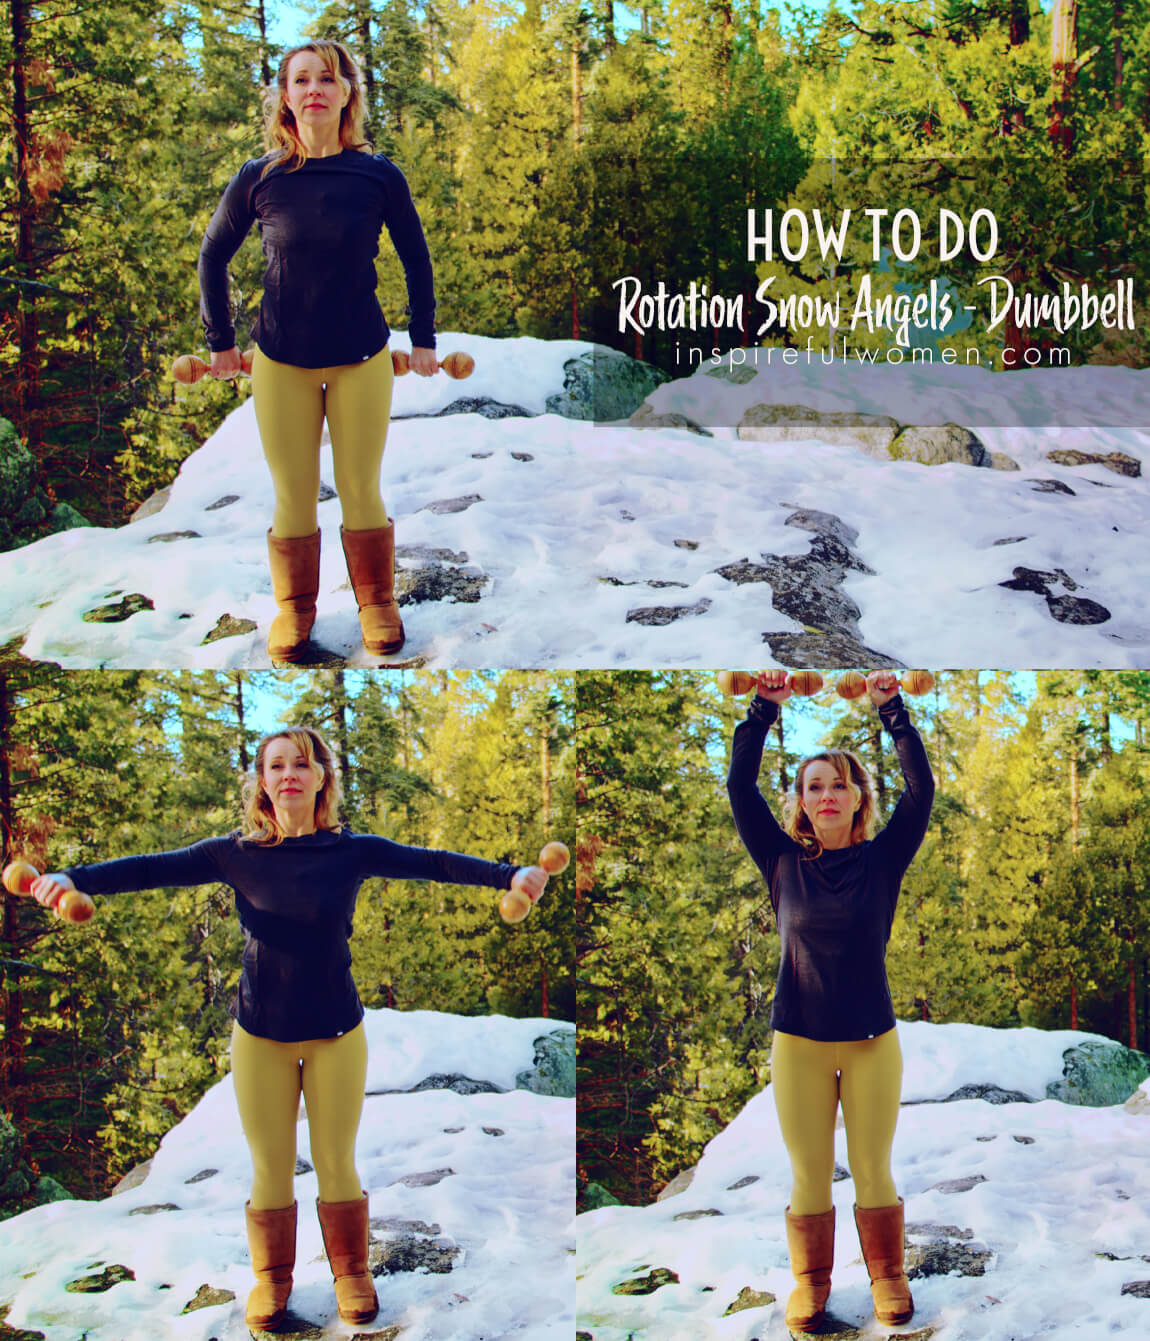 how-to-do-rotation-snow-angels-dumbbell-shoulder-rotator-cuff-exercise-at-home-women-40-plus